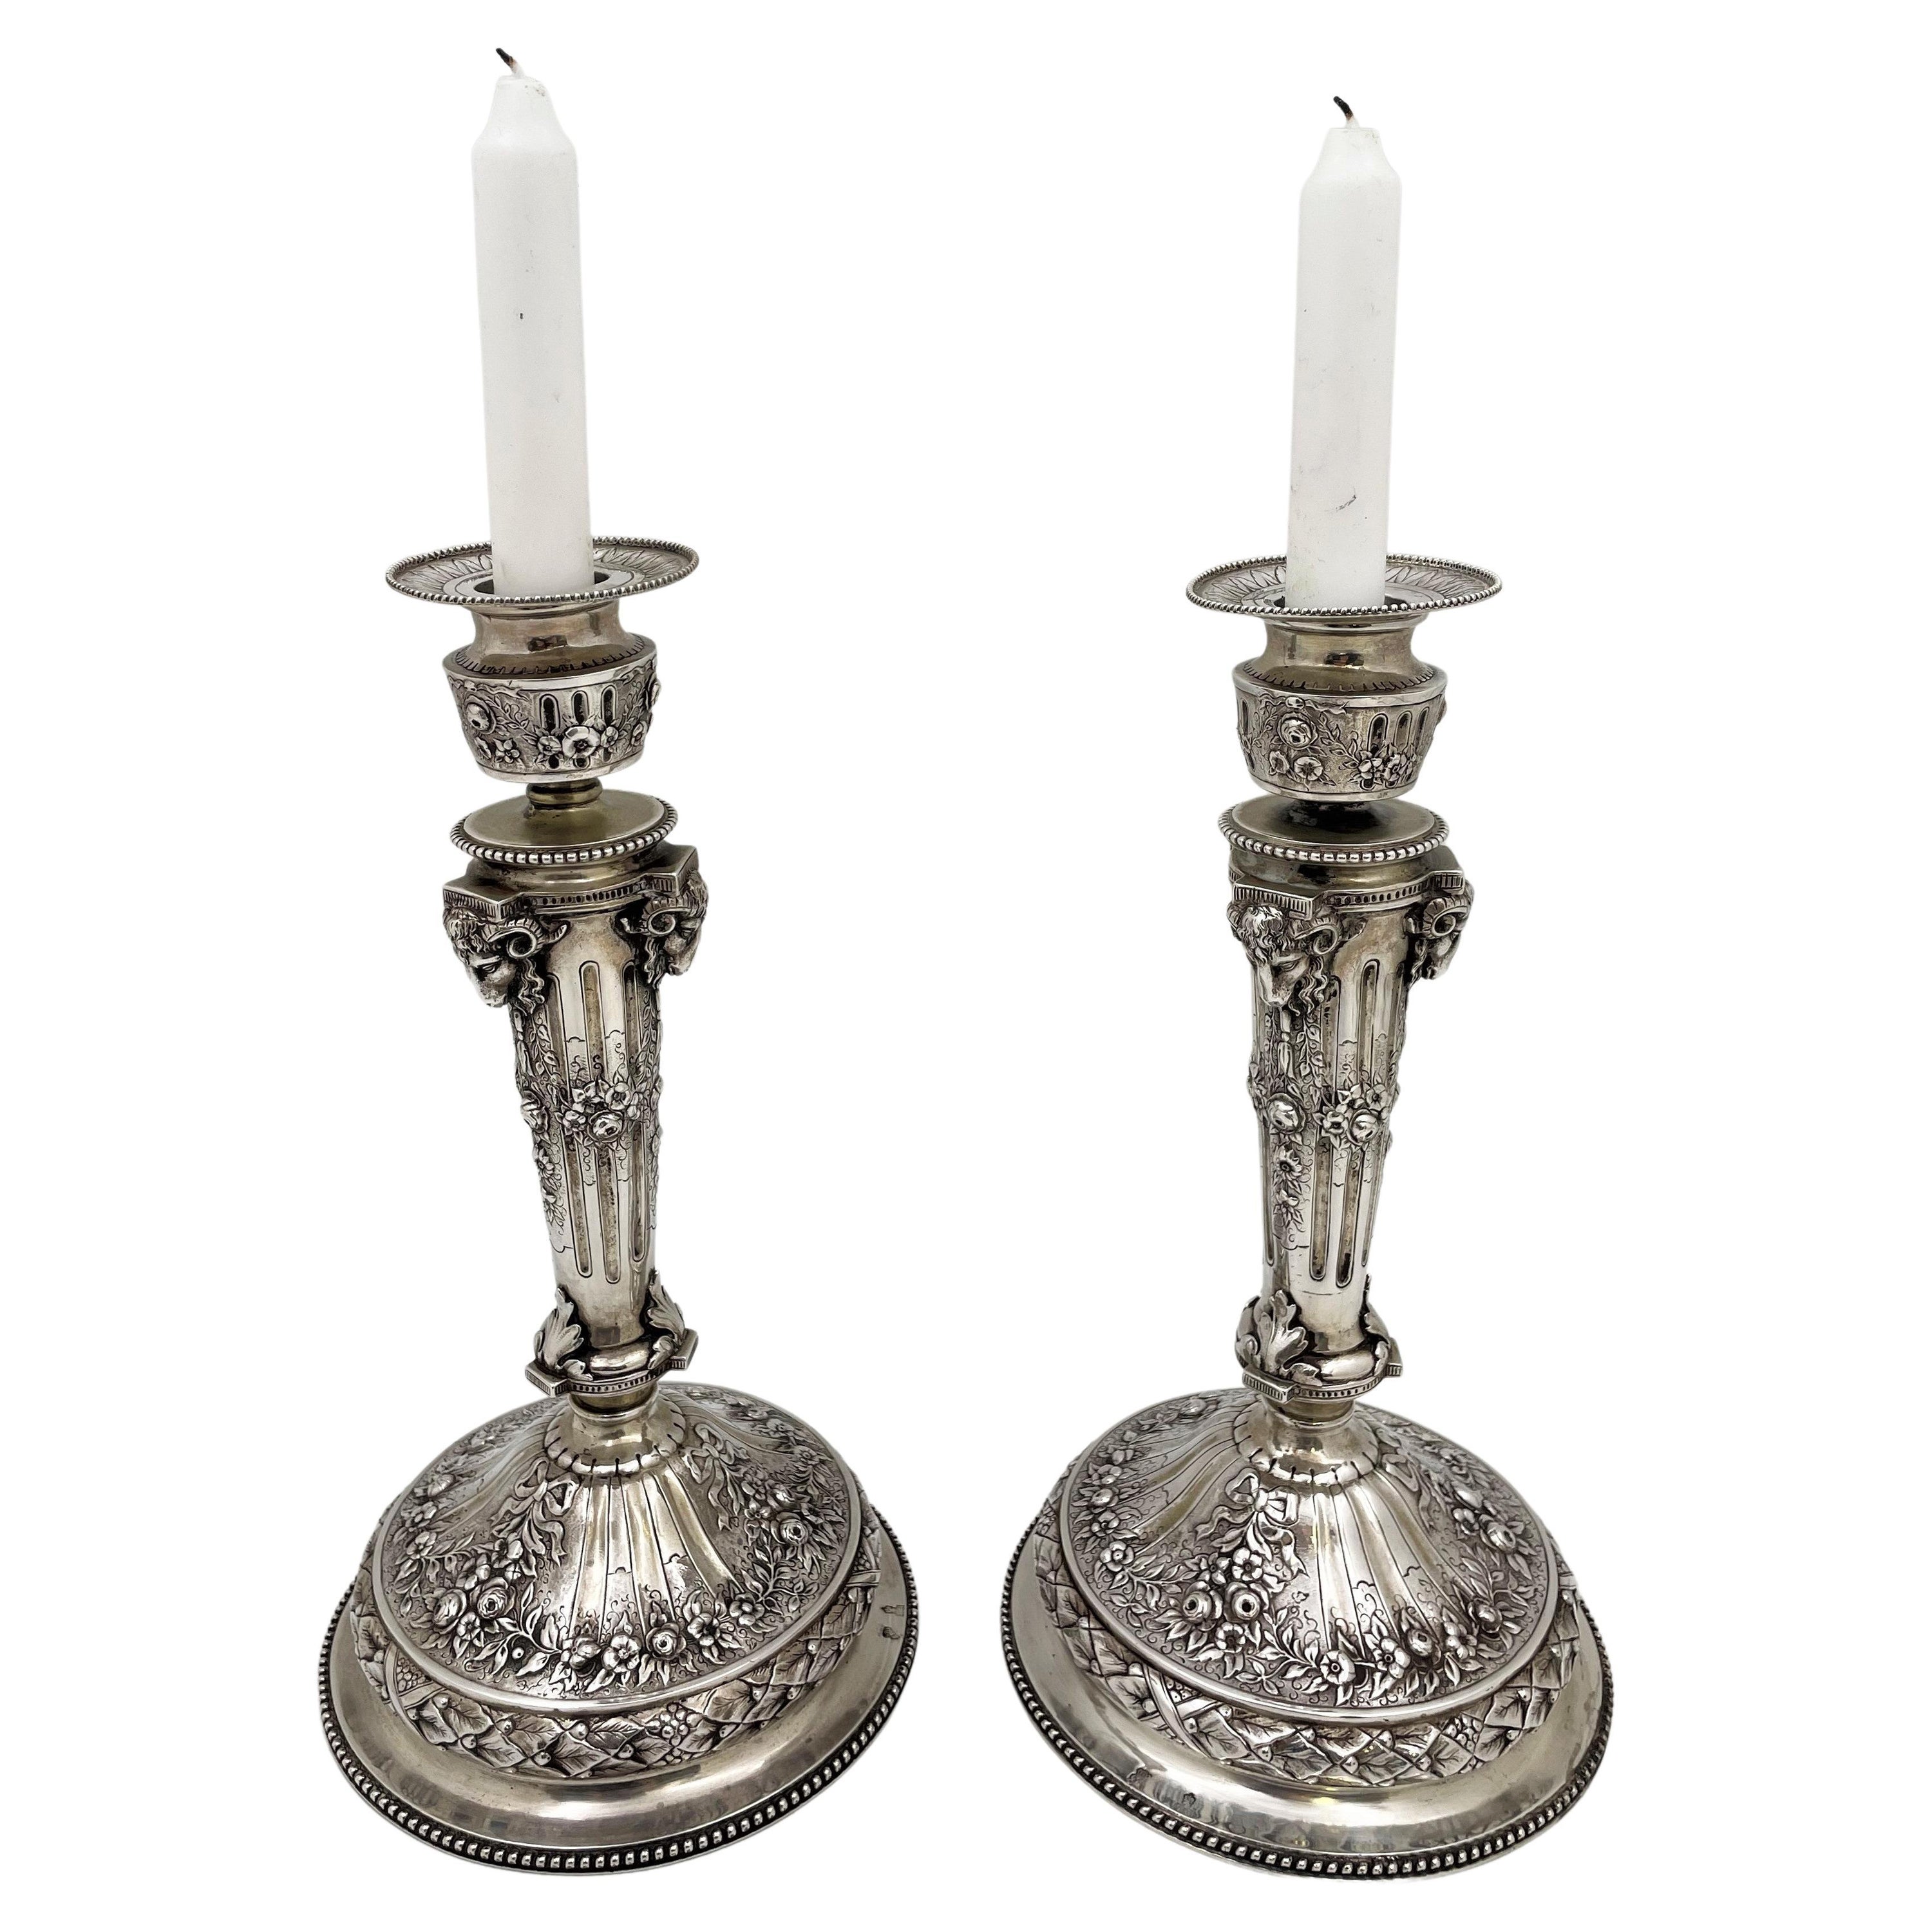 Pair of Continental Chased Silver Candlesticks from 19th Century with Rams' Head